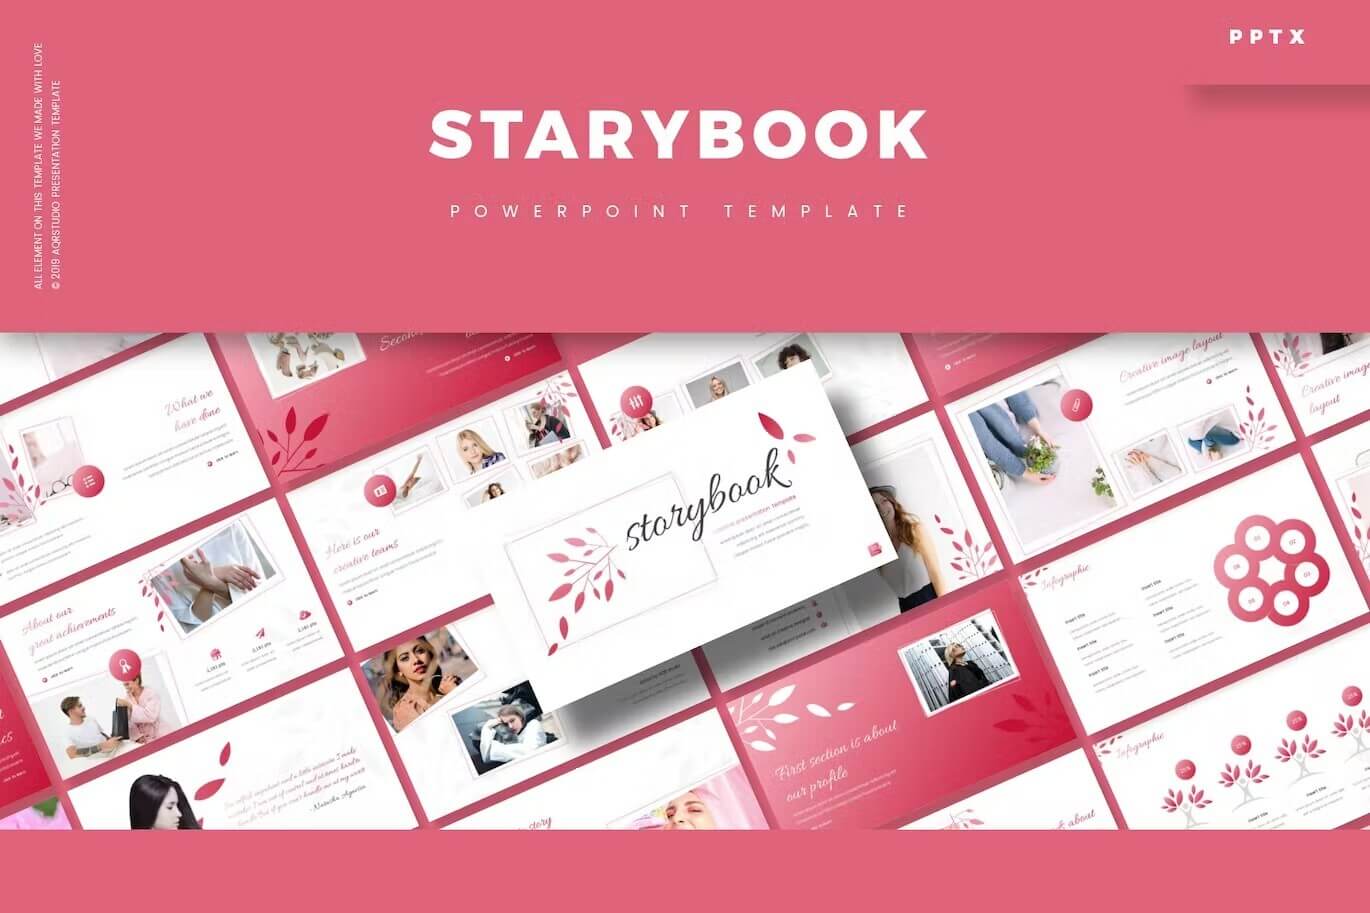 Starybook Powerpoint Template presentation slides with information about great achievements.